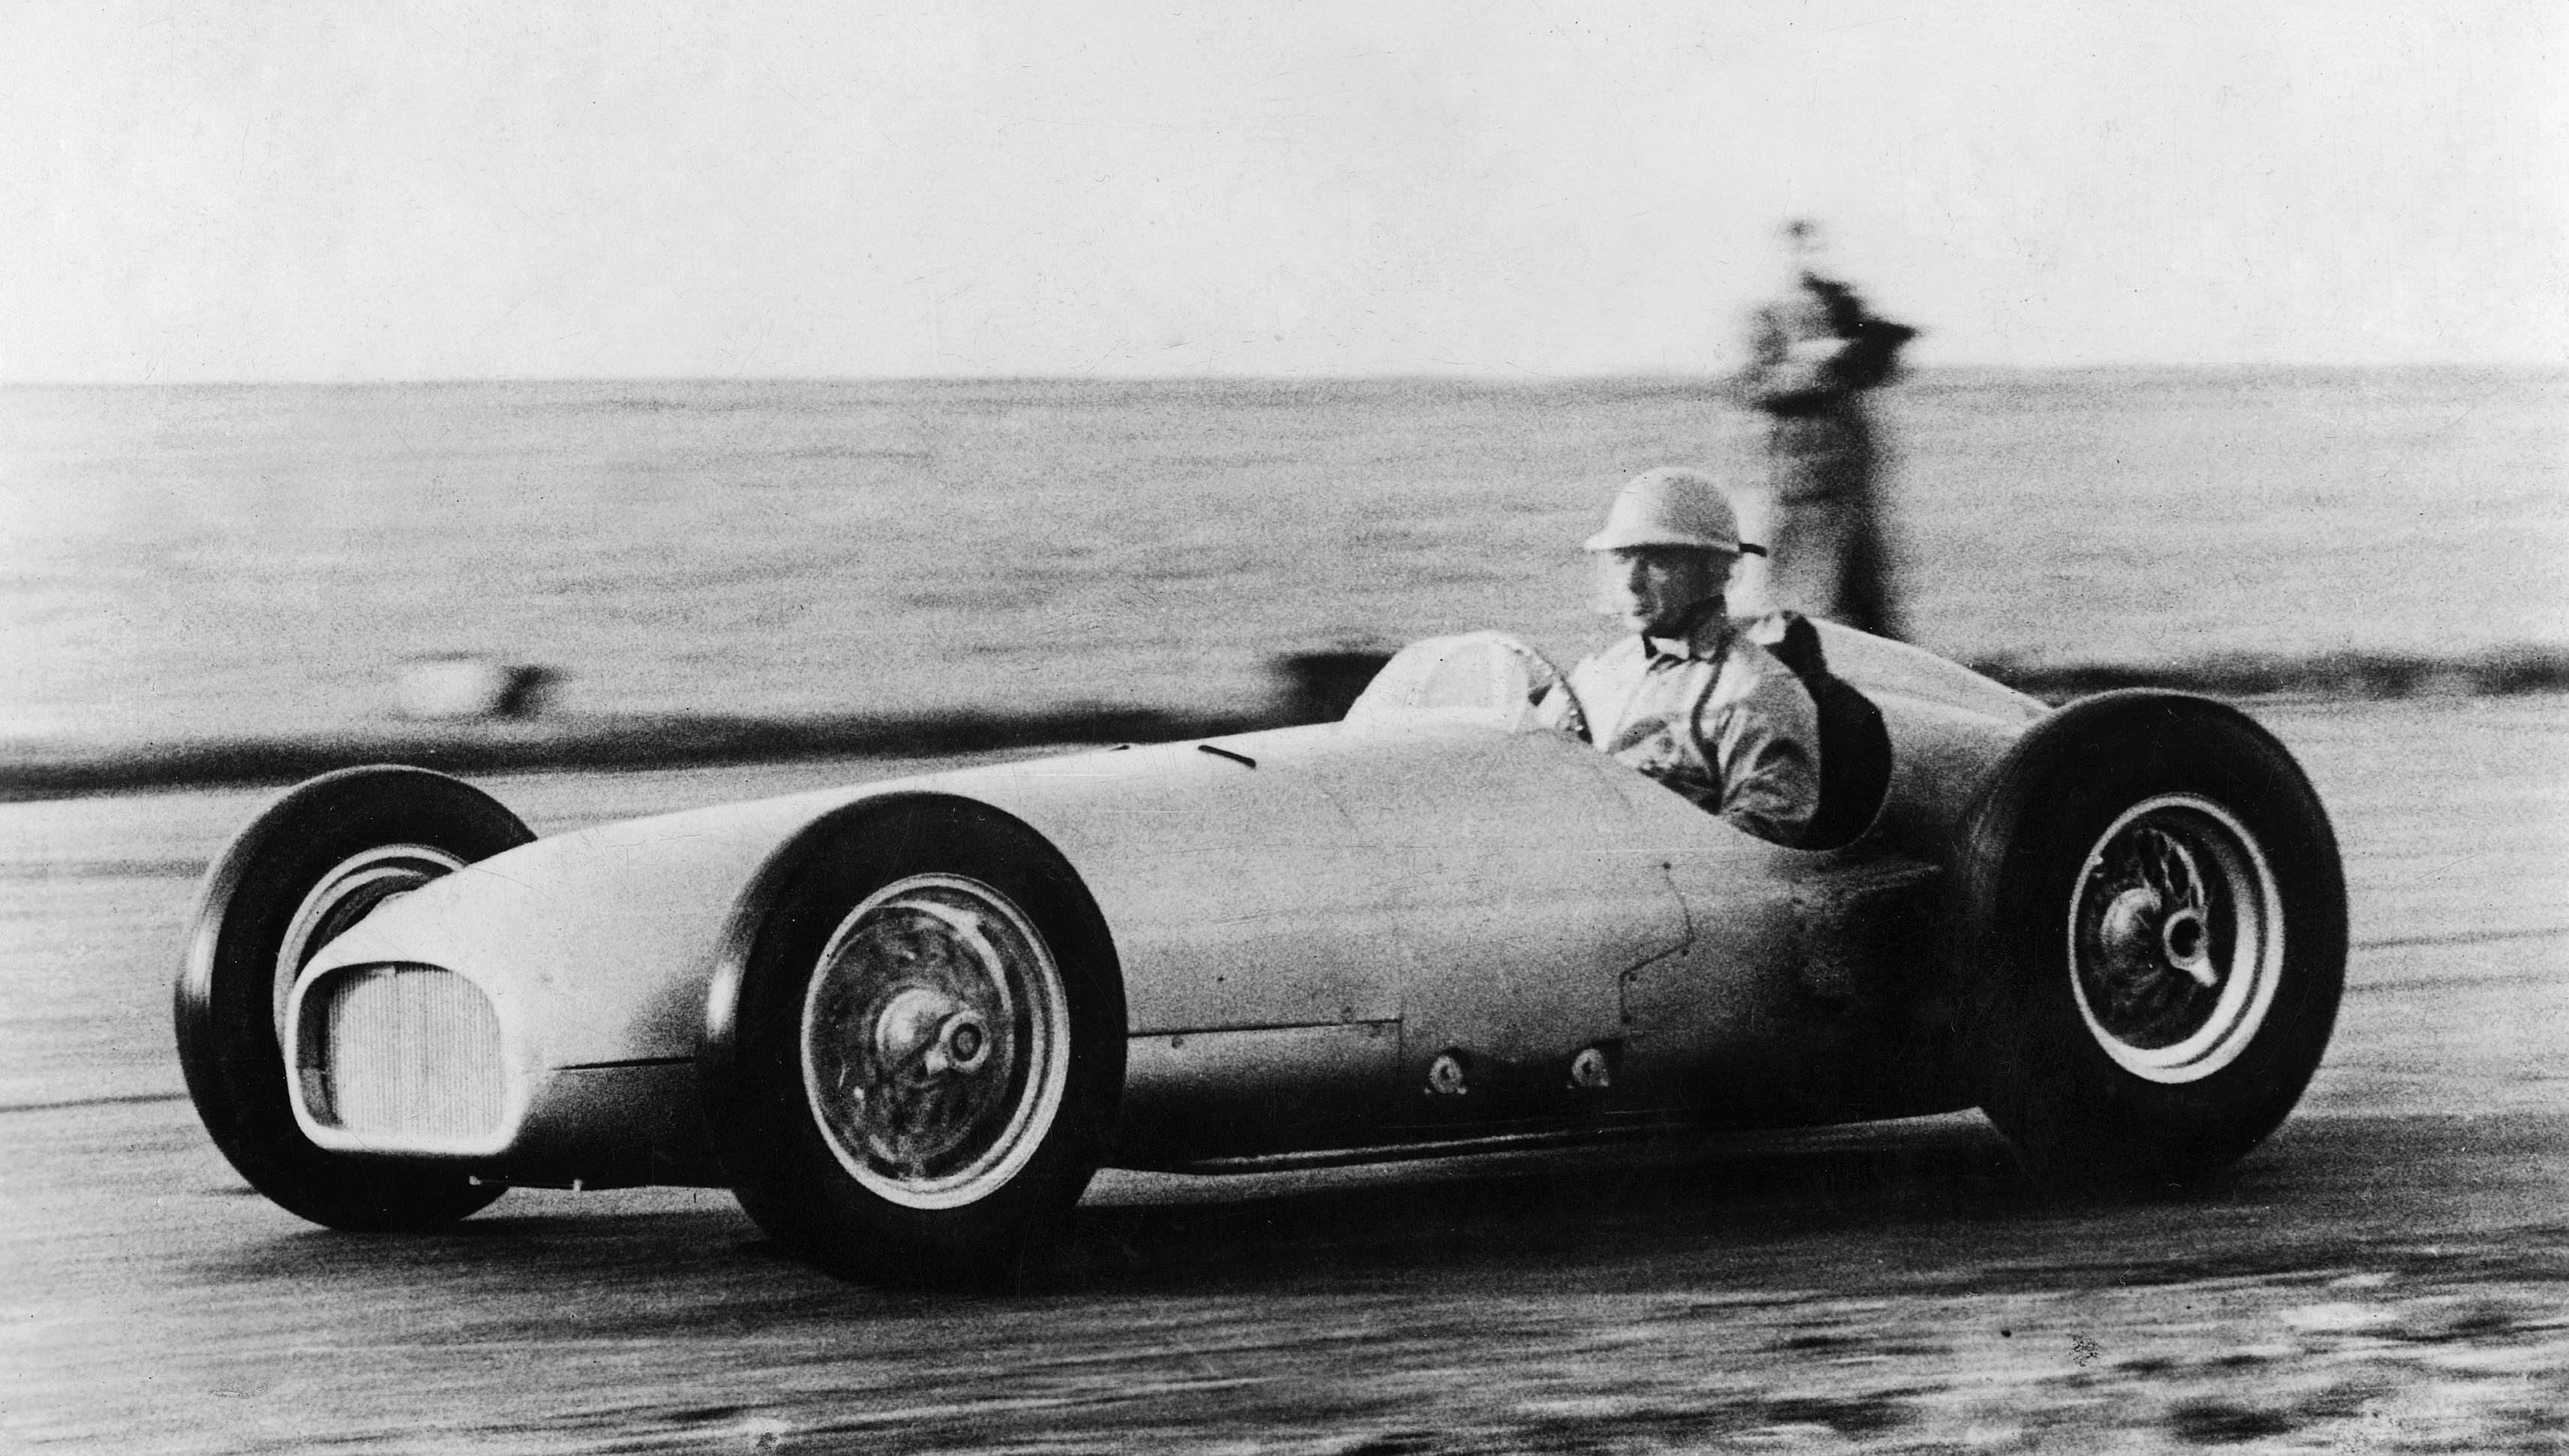 BRM V16 on test being driven by Ken Richardson 1950